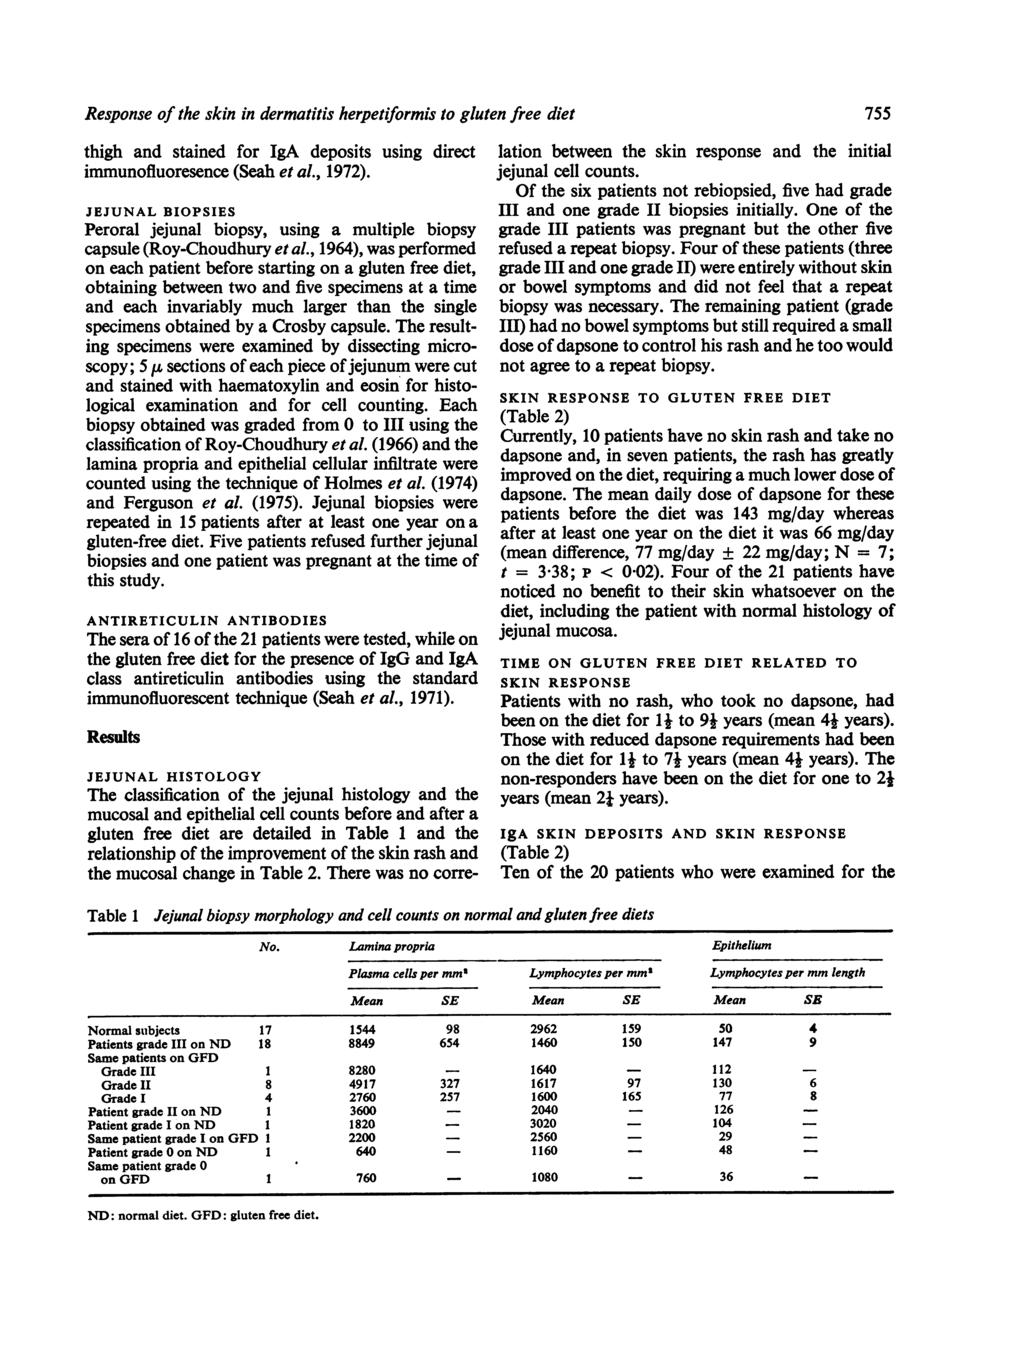 Response of the skin in dermatitis herpetiformis to gluten free diet thigh and stained for IgA deposits using direct immunofluoresence (Seah et al., 1972).